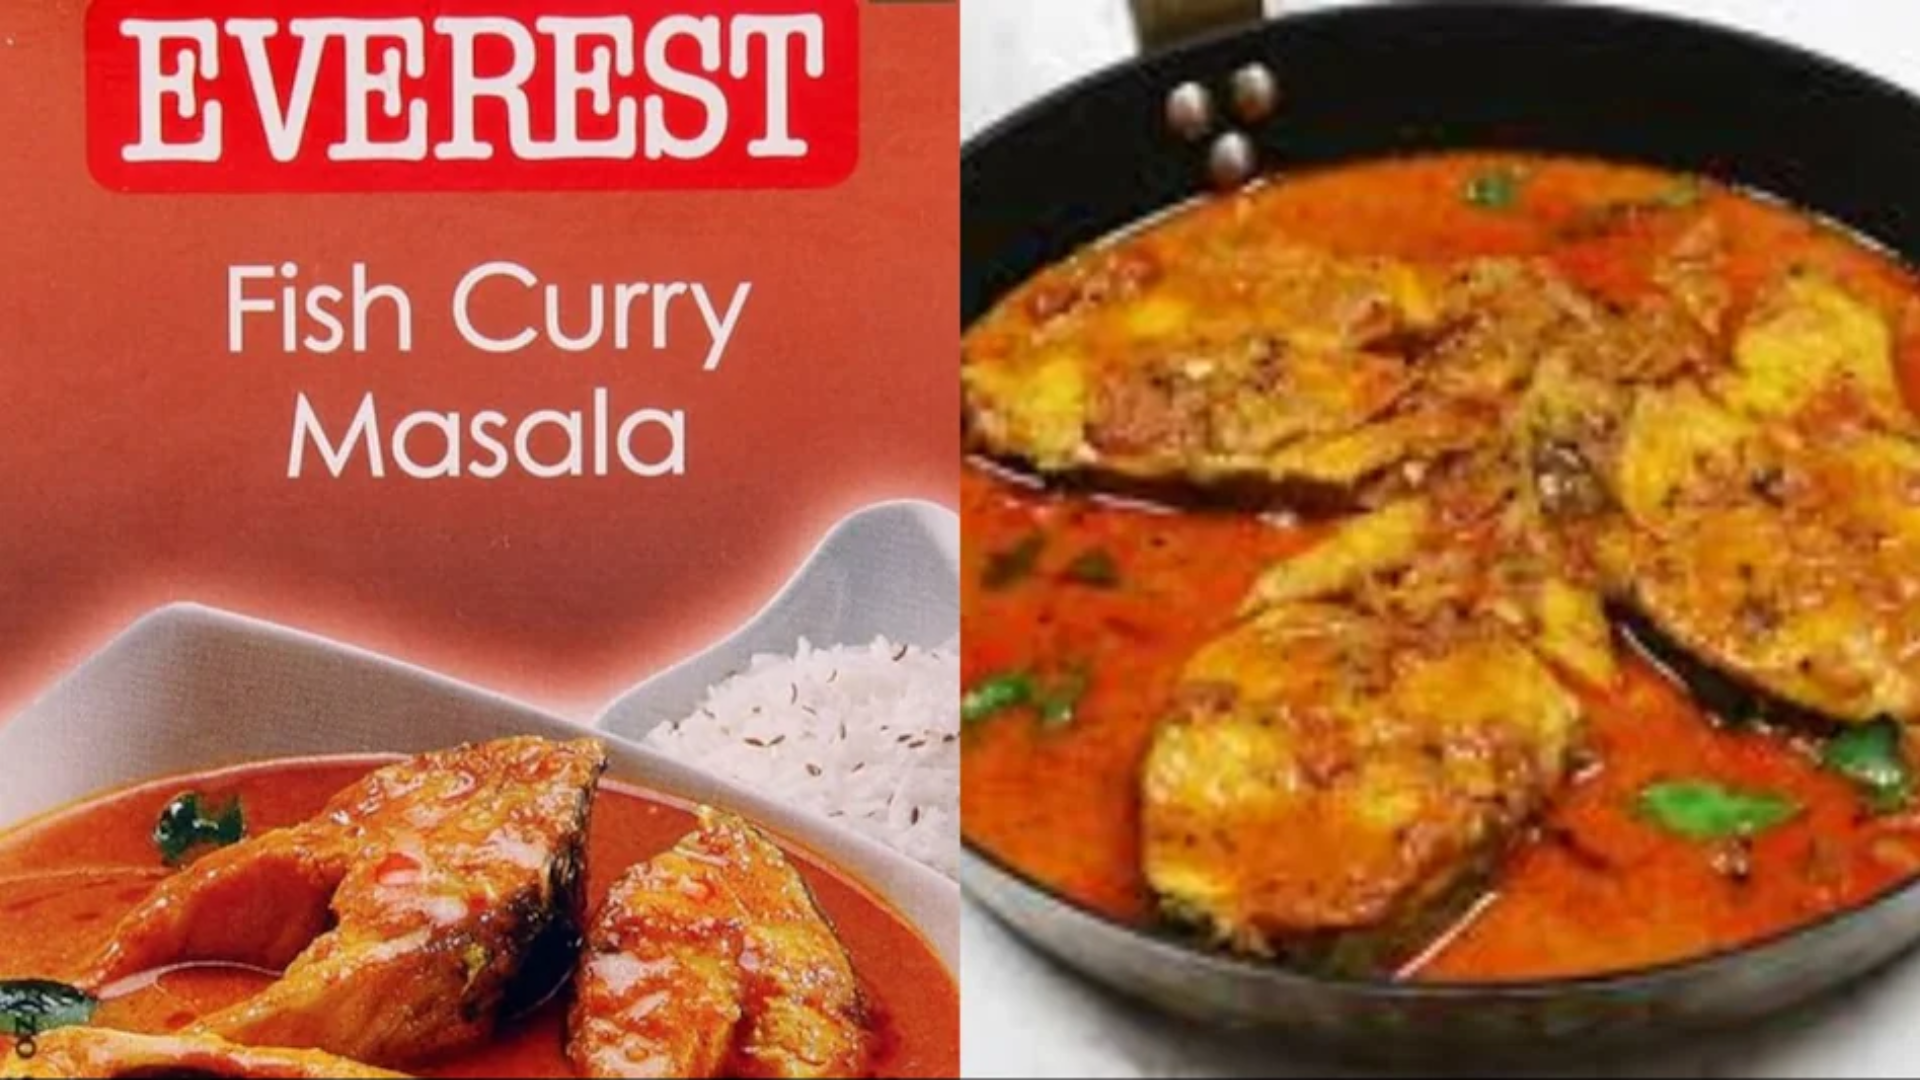 Singapore Recalls Everest Fish Curry Masala Due to Elevated Pesticide Levels